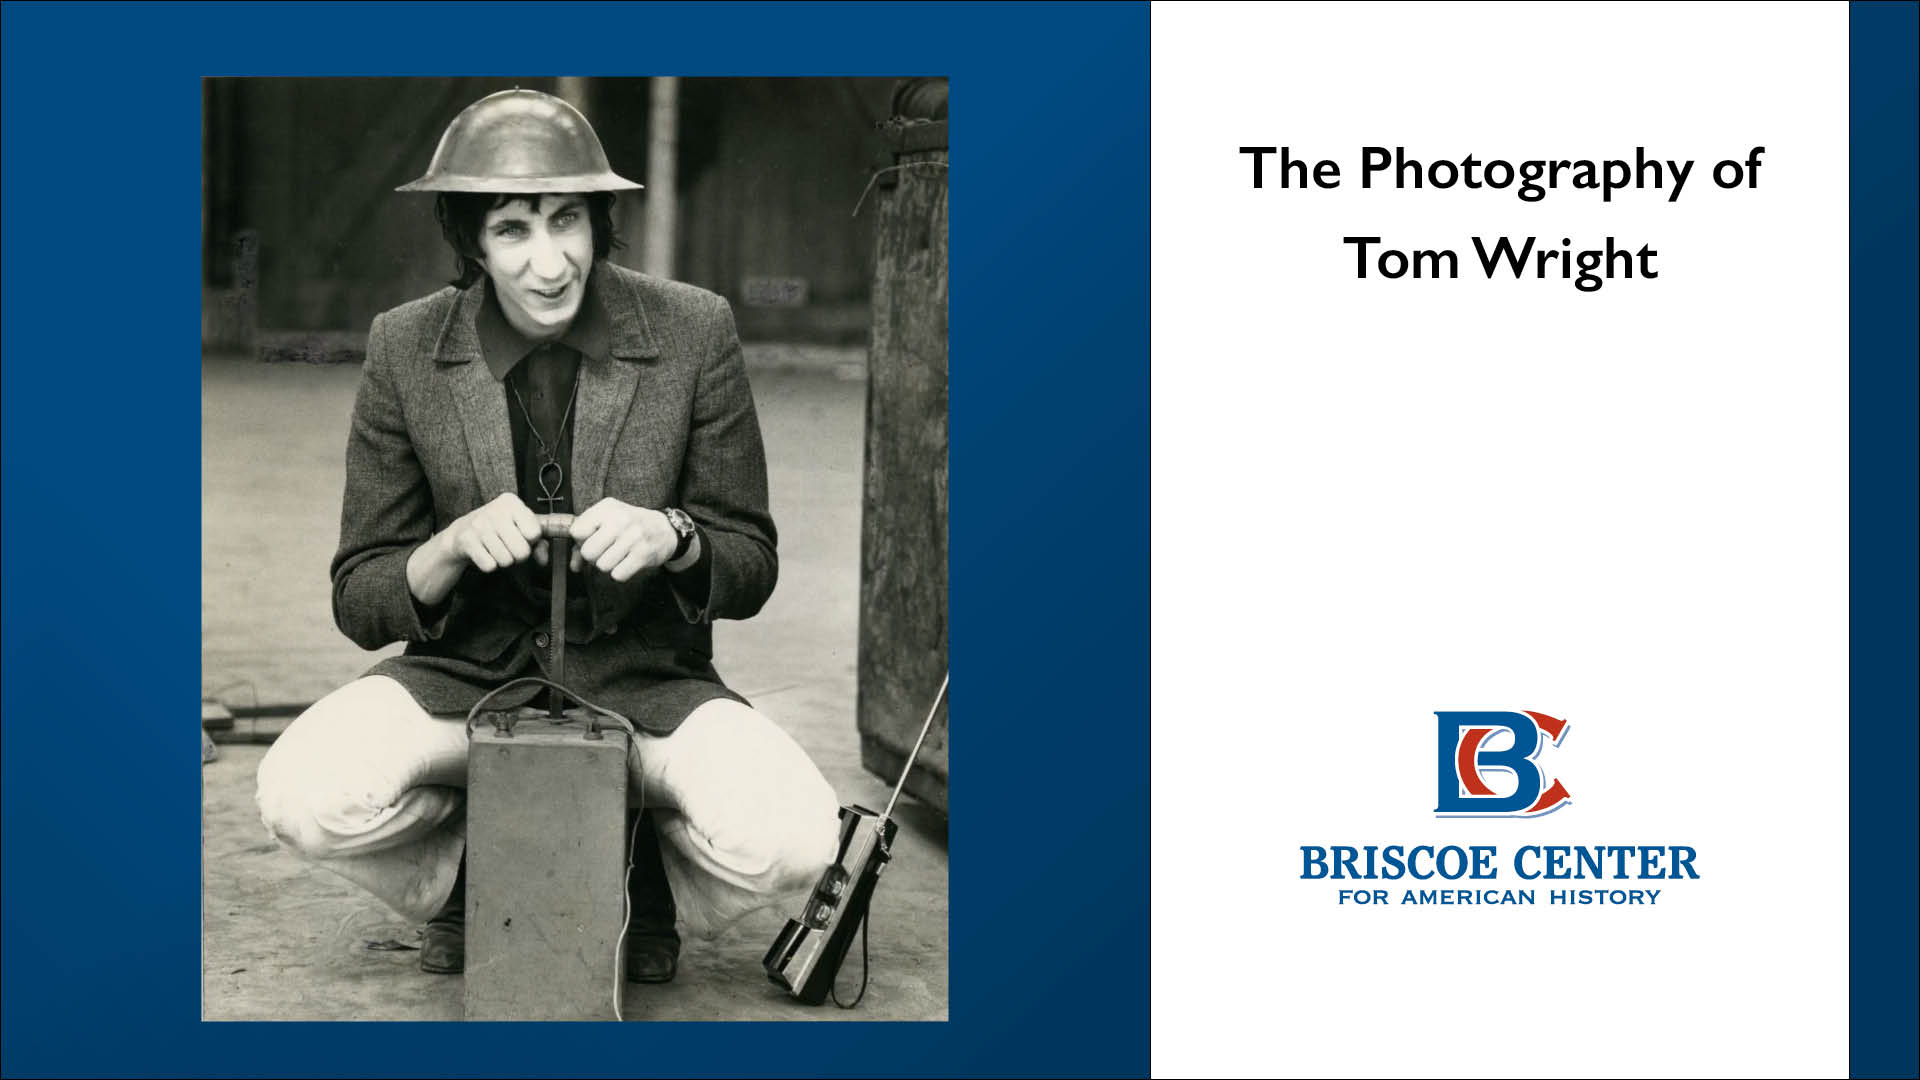 The Photography of Tom Wright